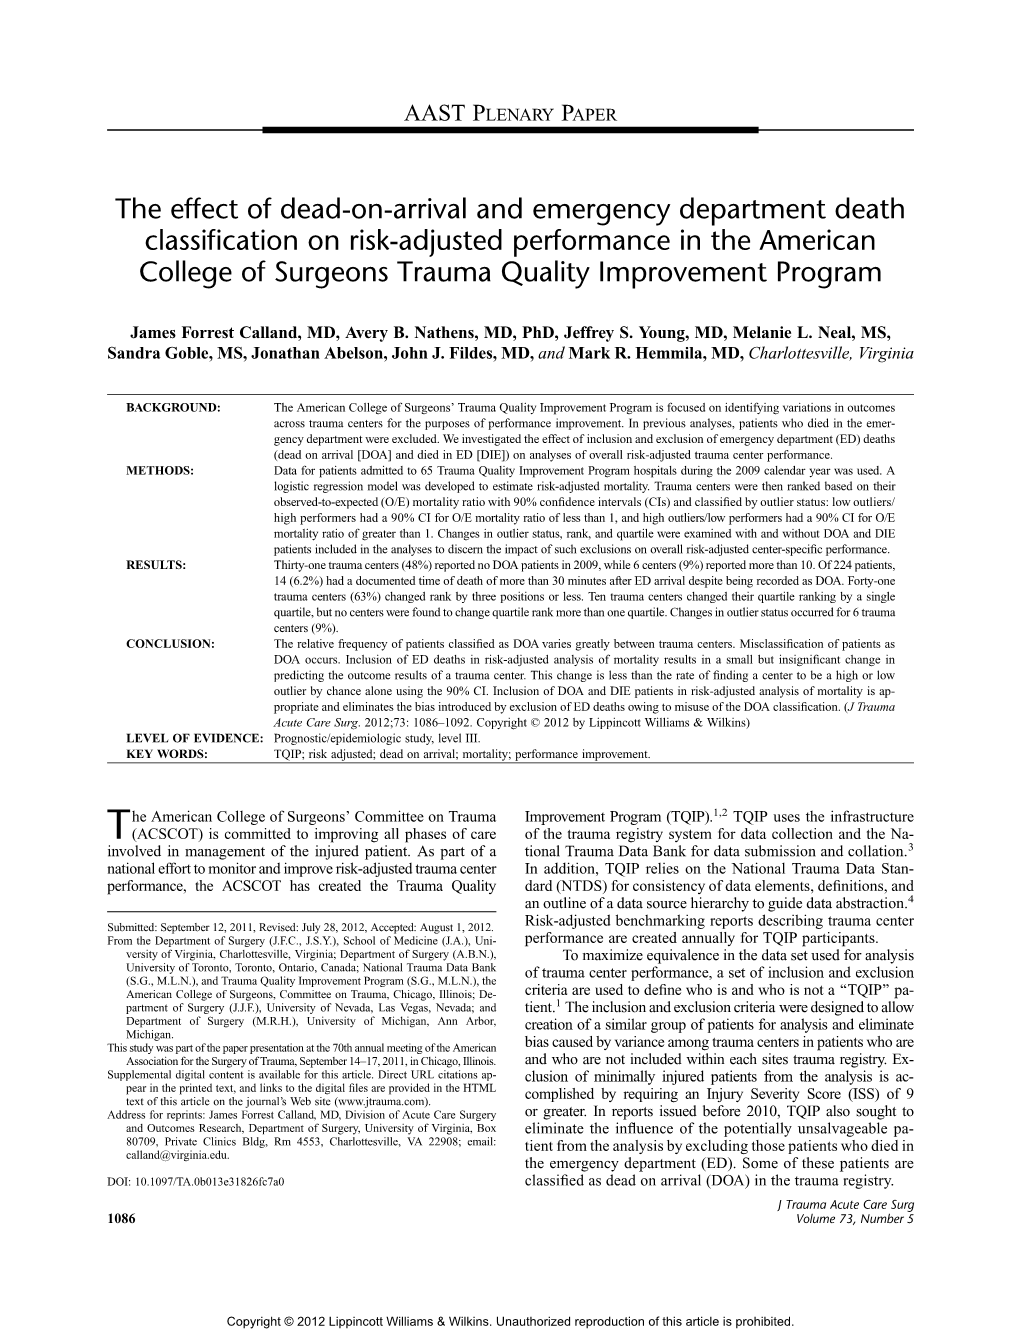 The Effect of Dead-On-Arrival and Emergency Department Death Classification on Risk-Adjusted Performance in the American College